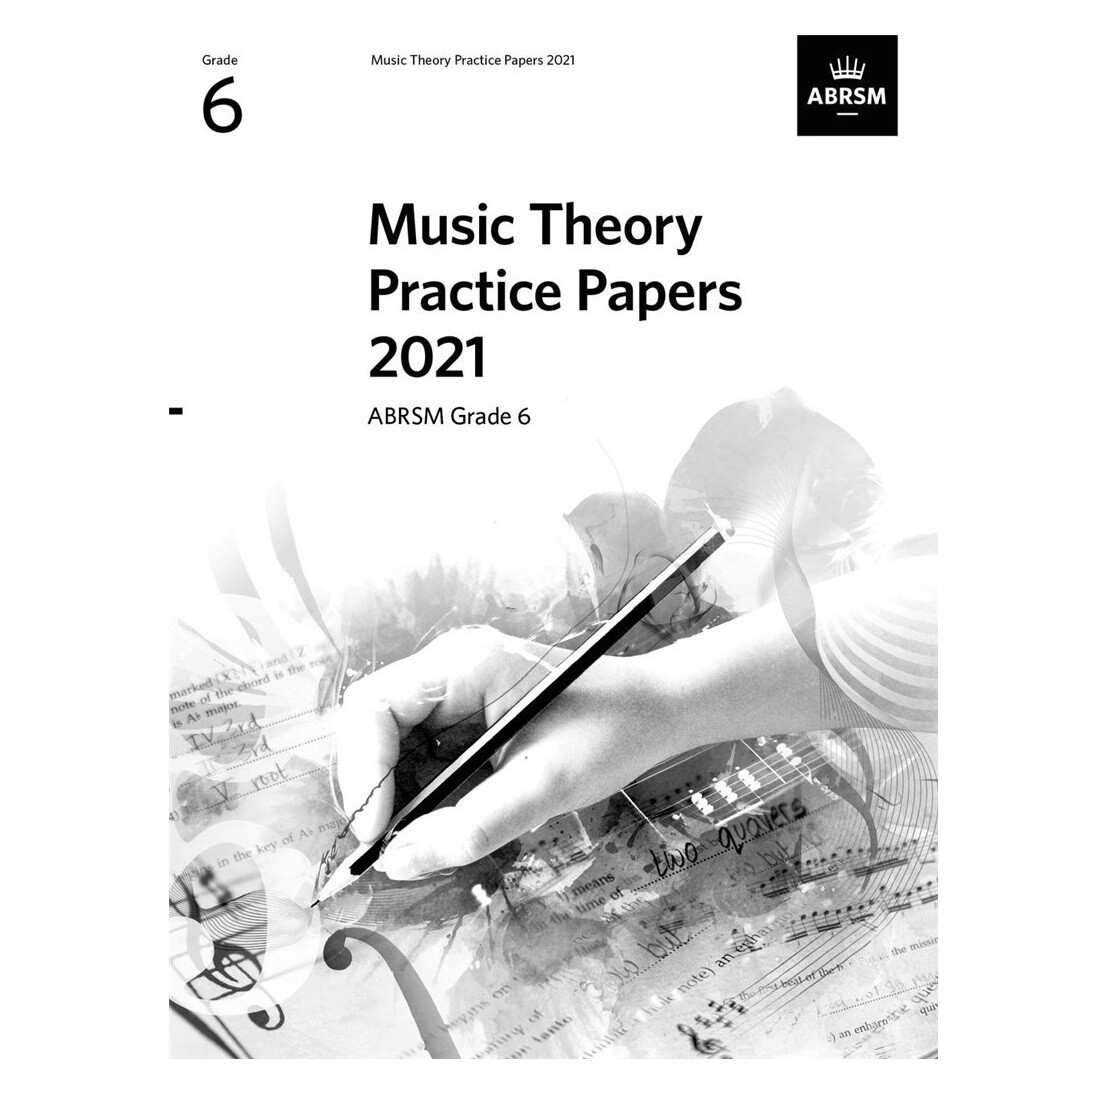 ABRSM Music Theory Practice Papers 2021: Grade 6